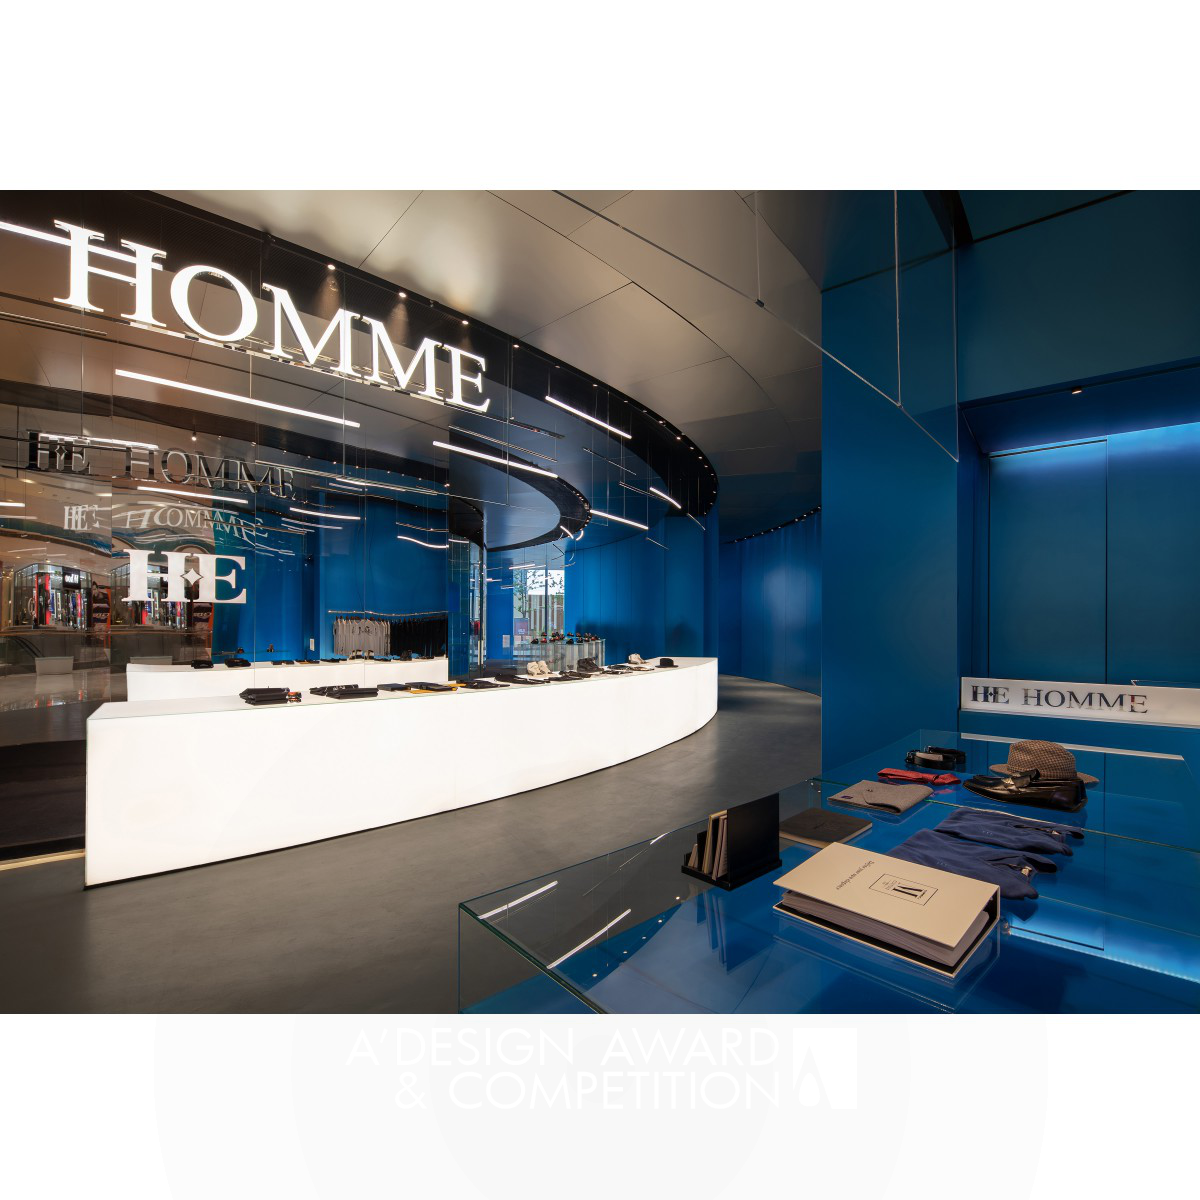 He Homme High-End Couture <b>Men’s High-end Tailor Interior